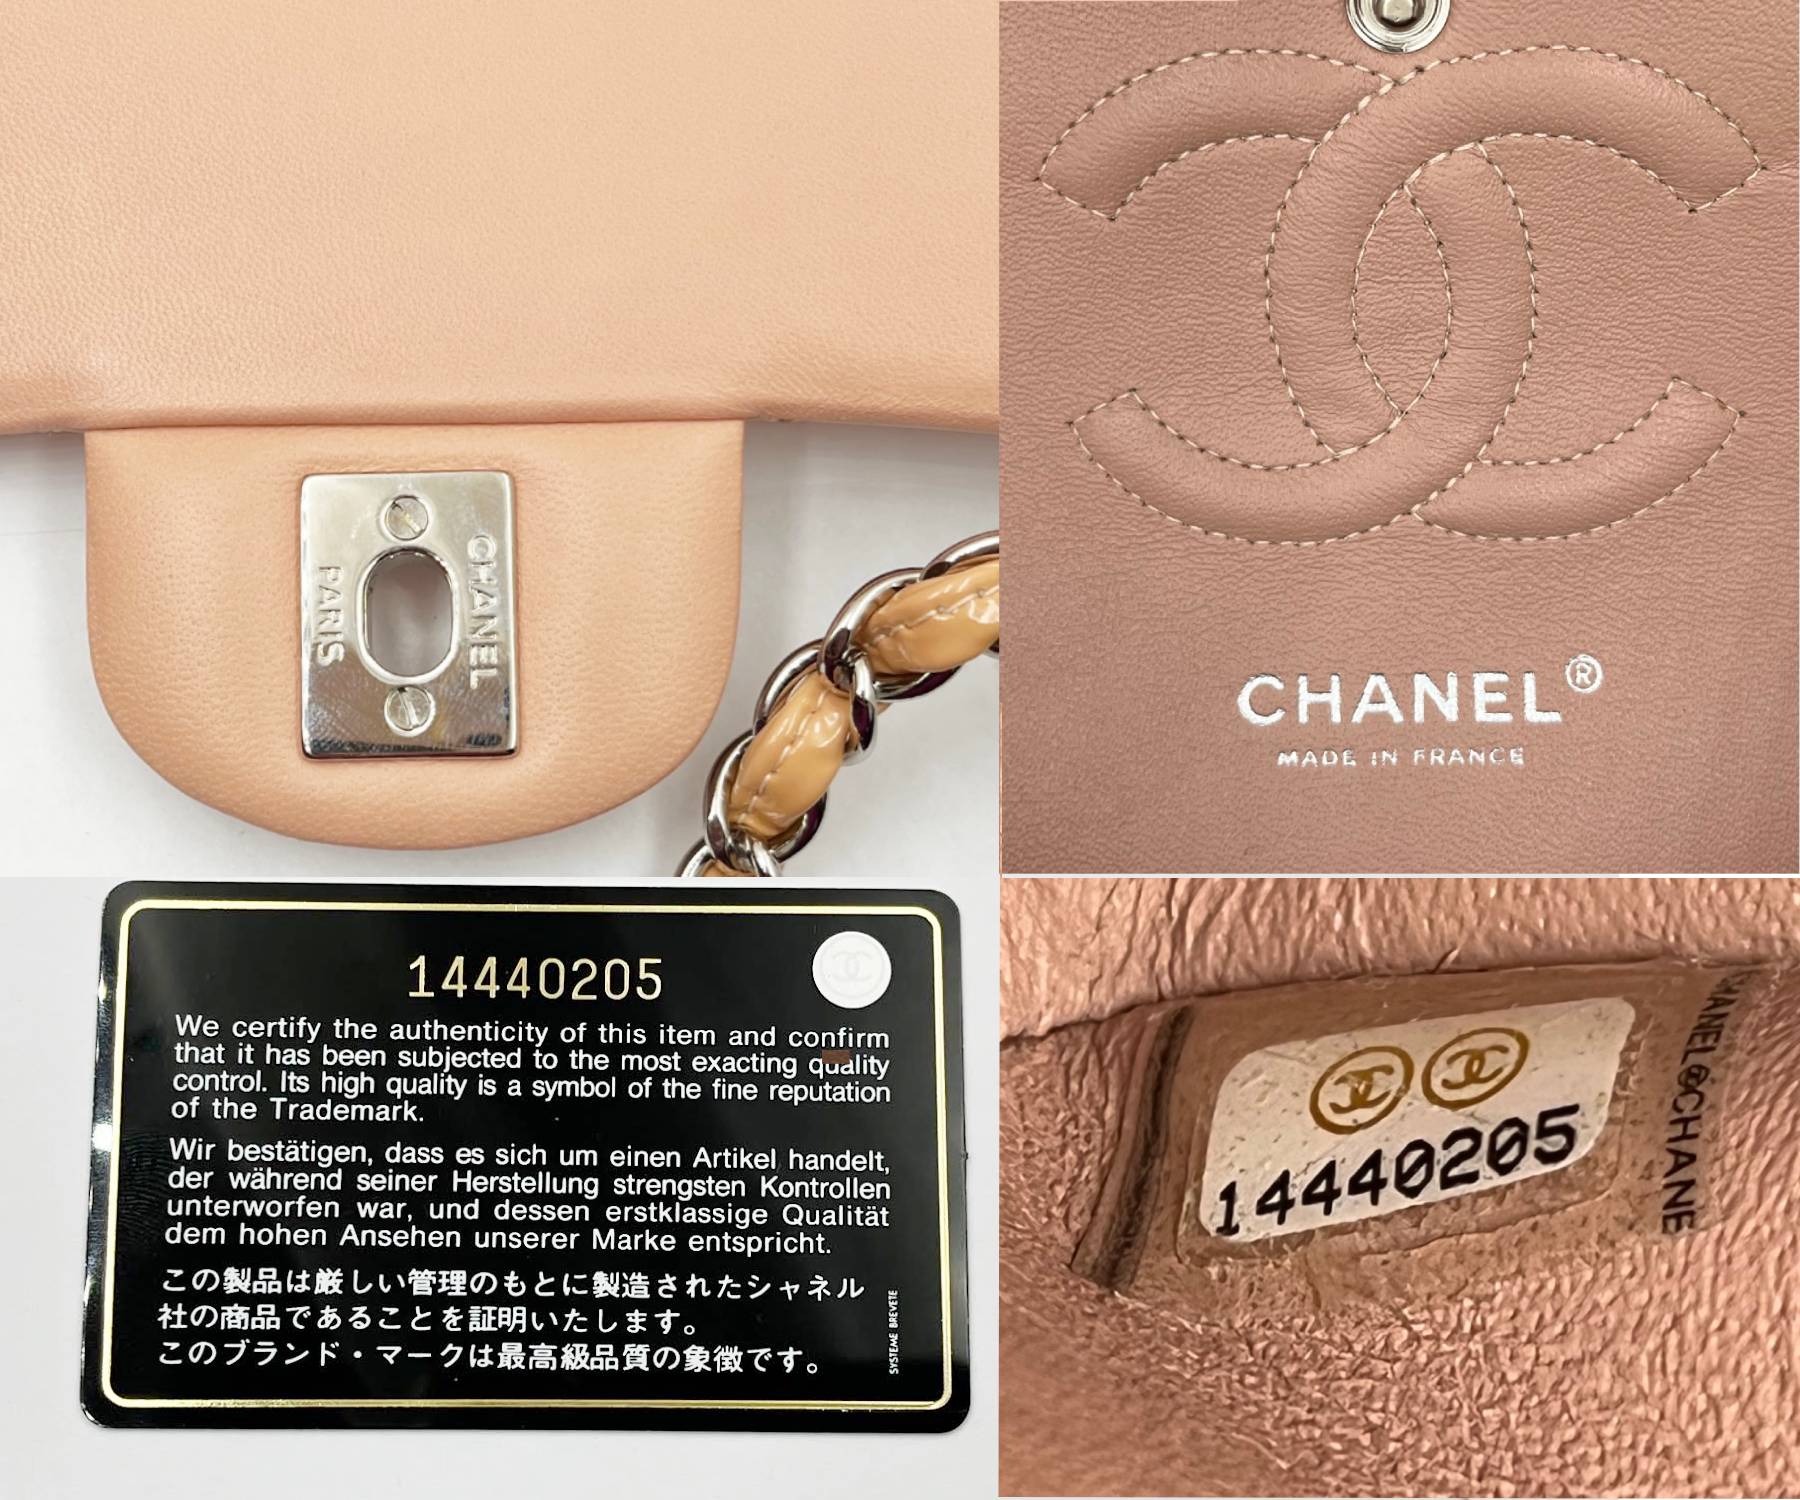 Chanel Peach & Black Leather Coco Cocoon Bag (Authentic Pre-Owned